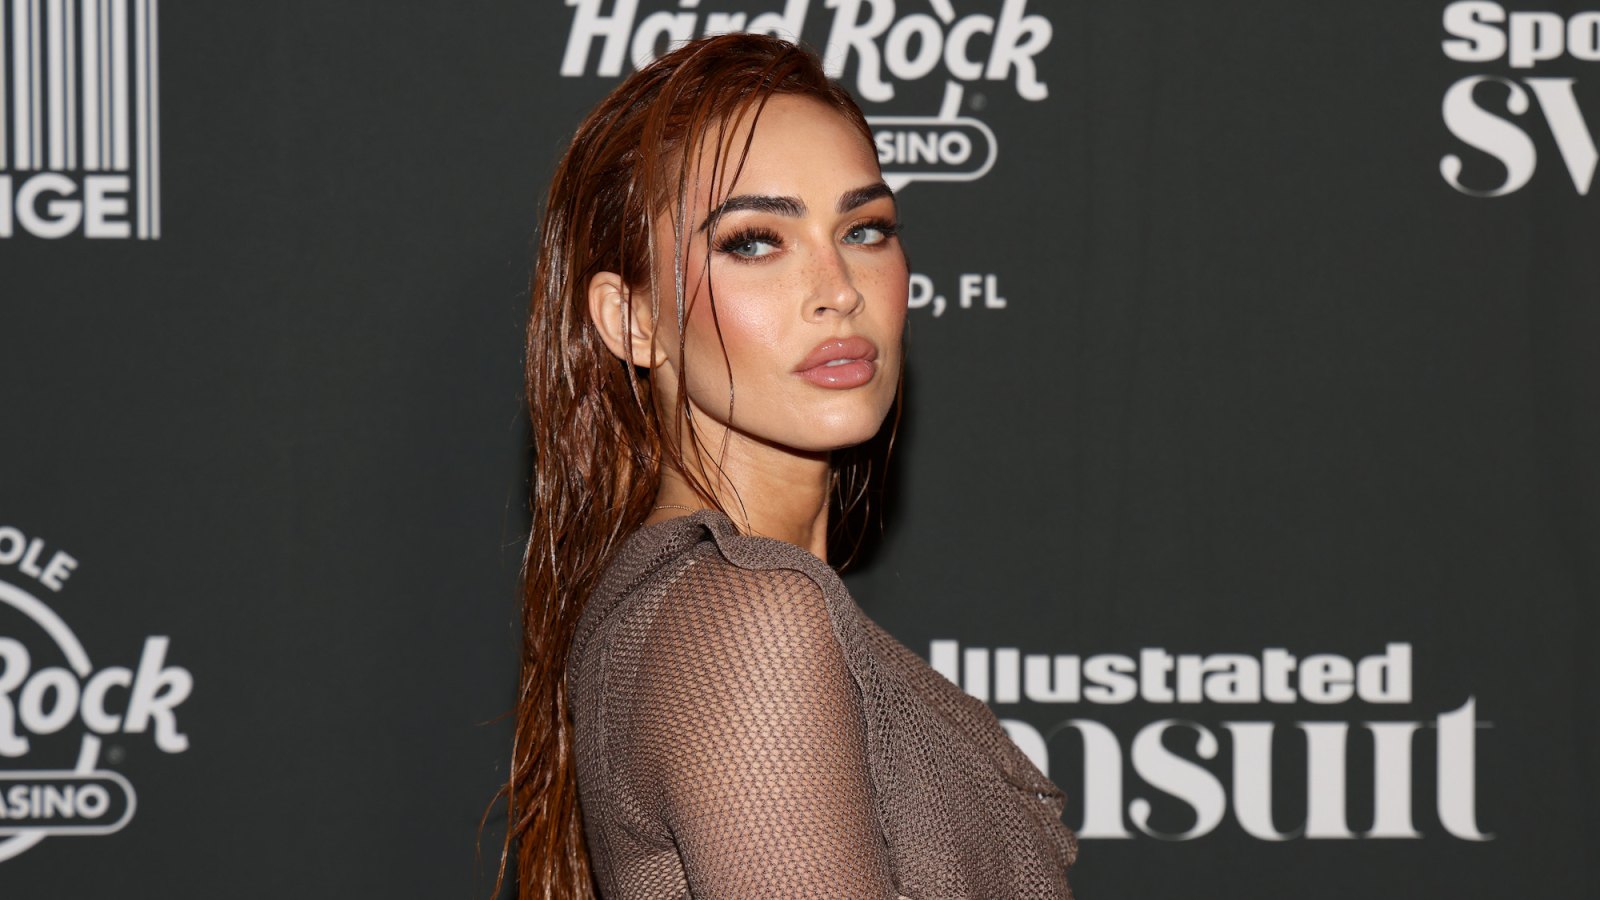 Megan Fox Details Past Abusive Relationships in New Book